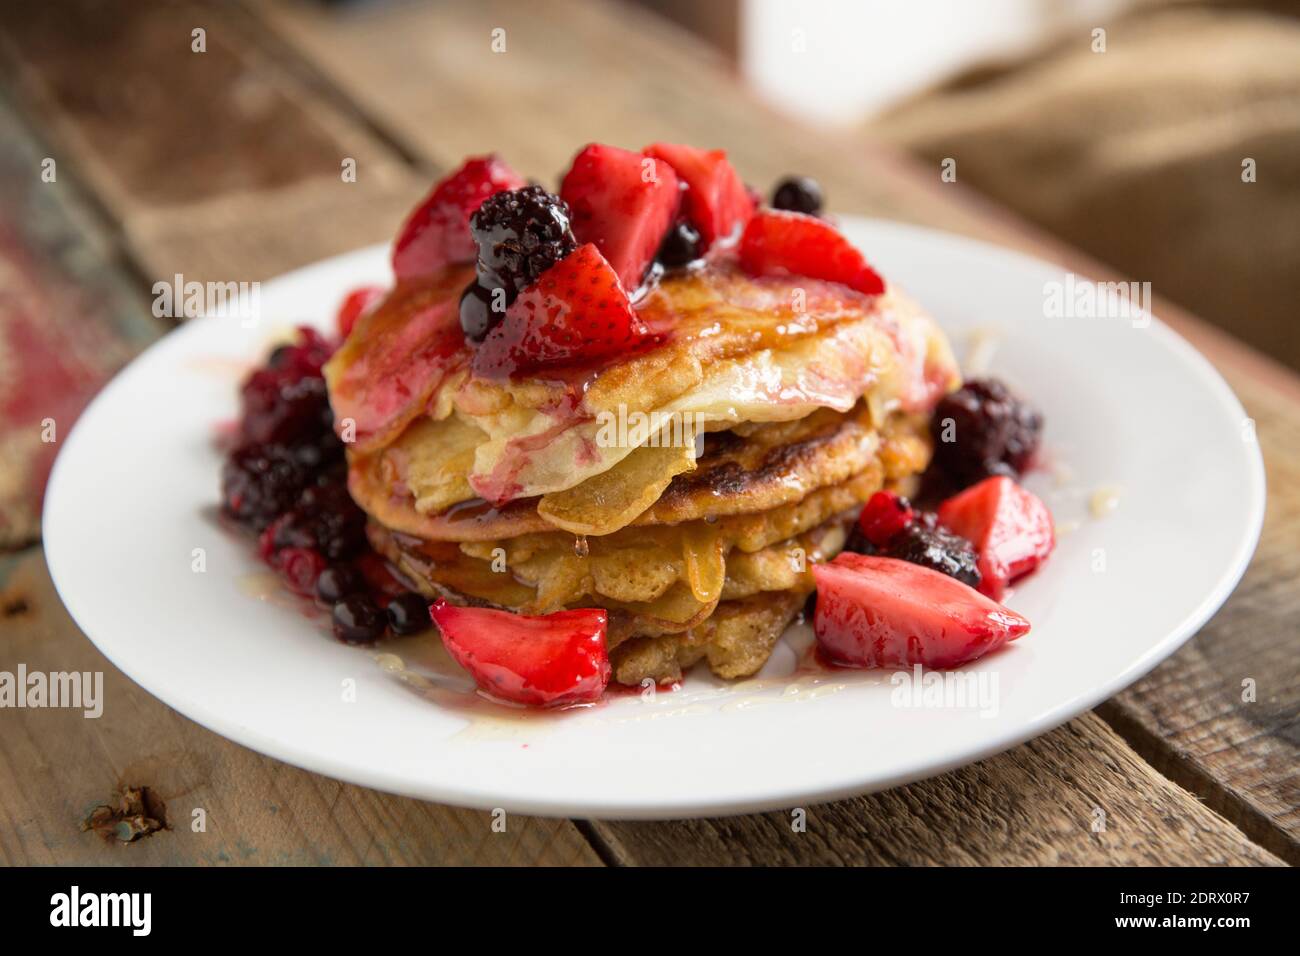 Homemade American style pancakes served with honey and defrosted frozen fruit. England UK GB Stock Photo